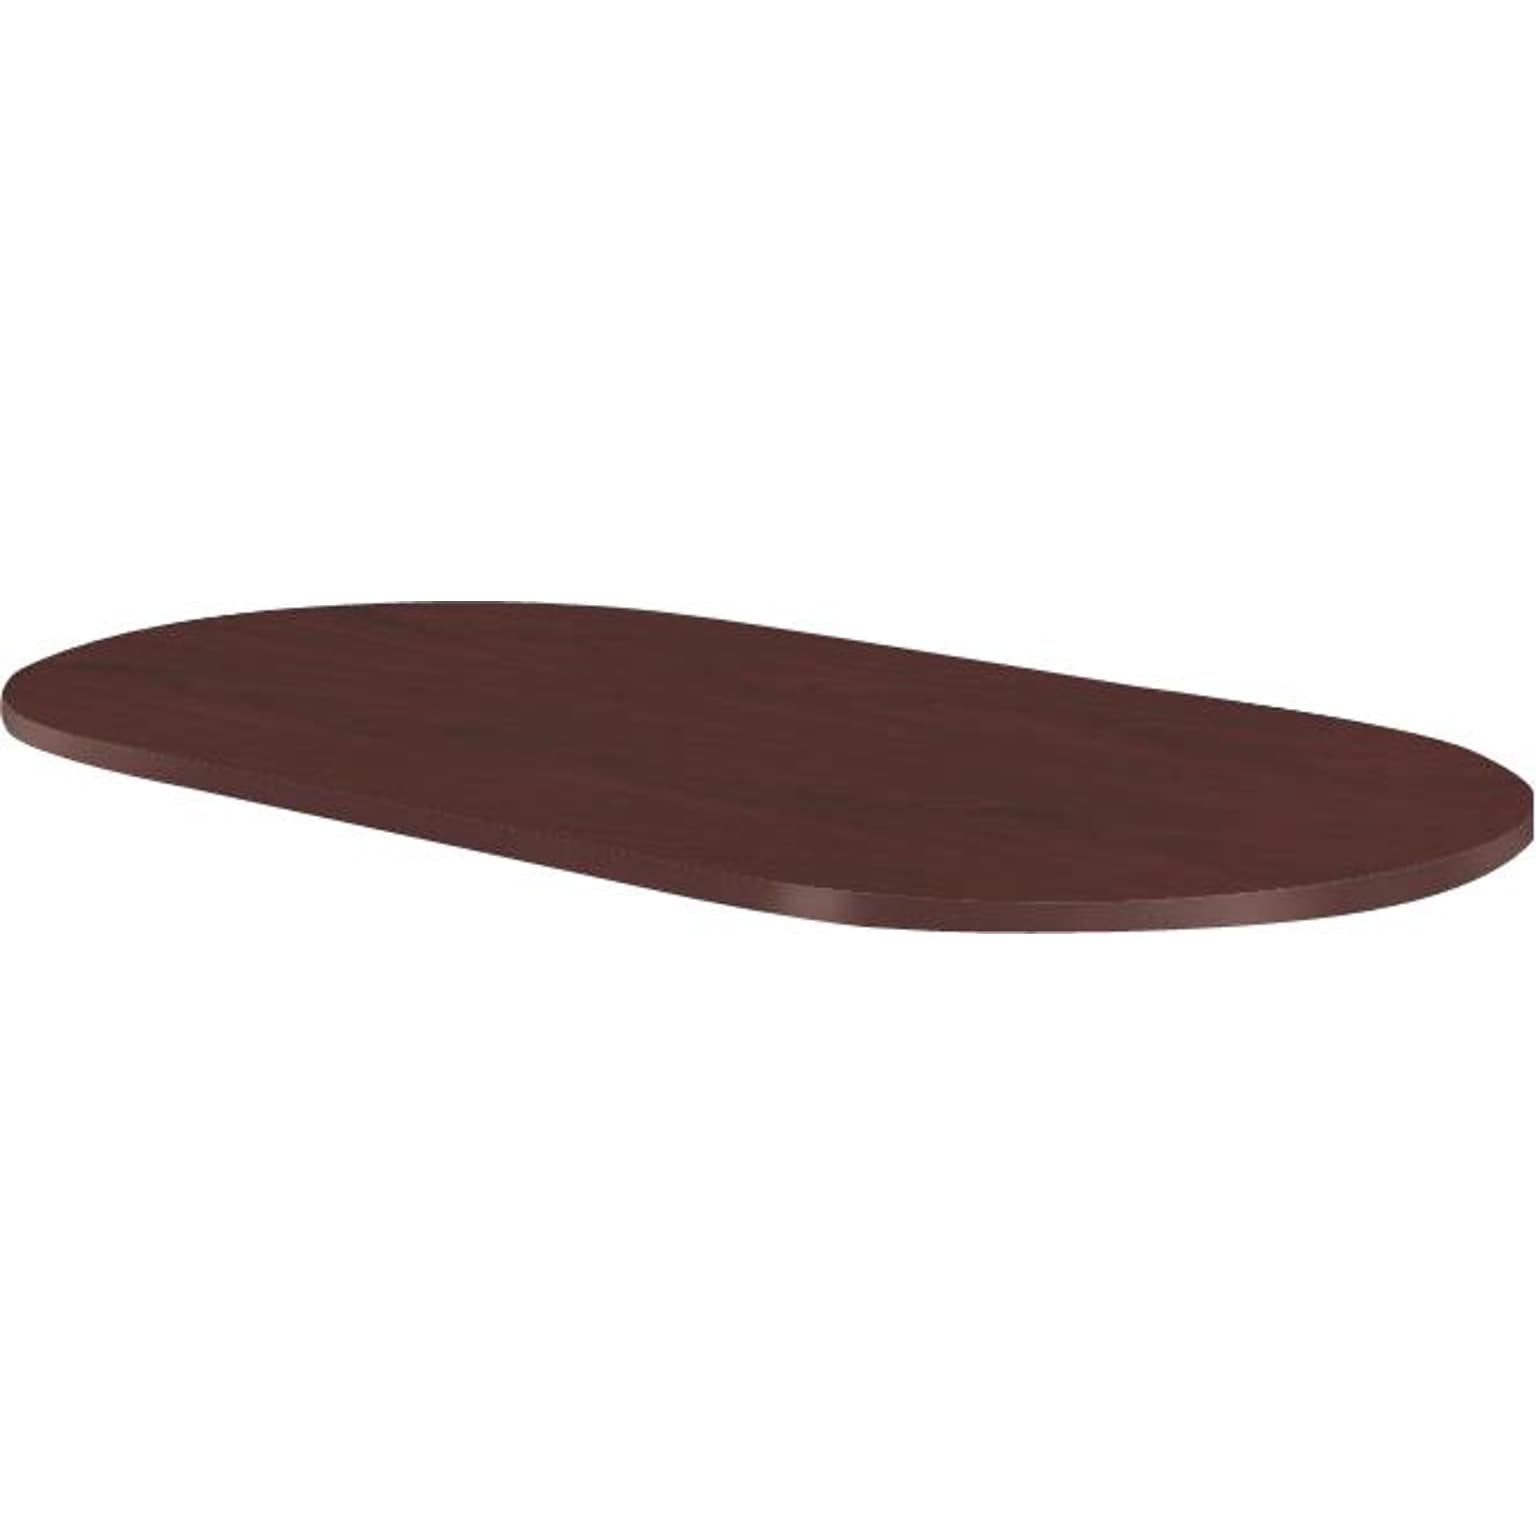 HON® Preside Laminate Oval Conference Tabletop, 96W, Mahogany, 1 1/8H x 96W x 48D